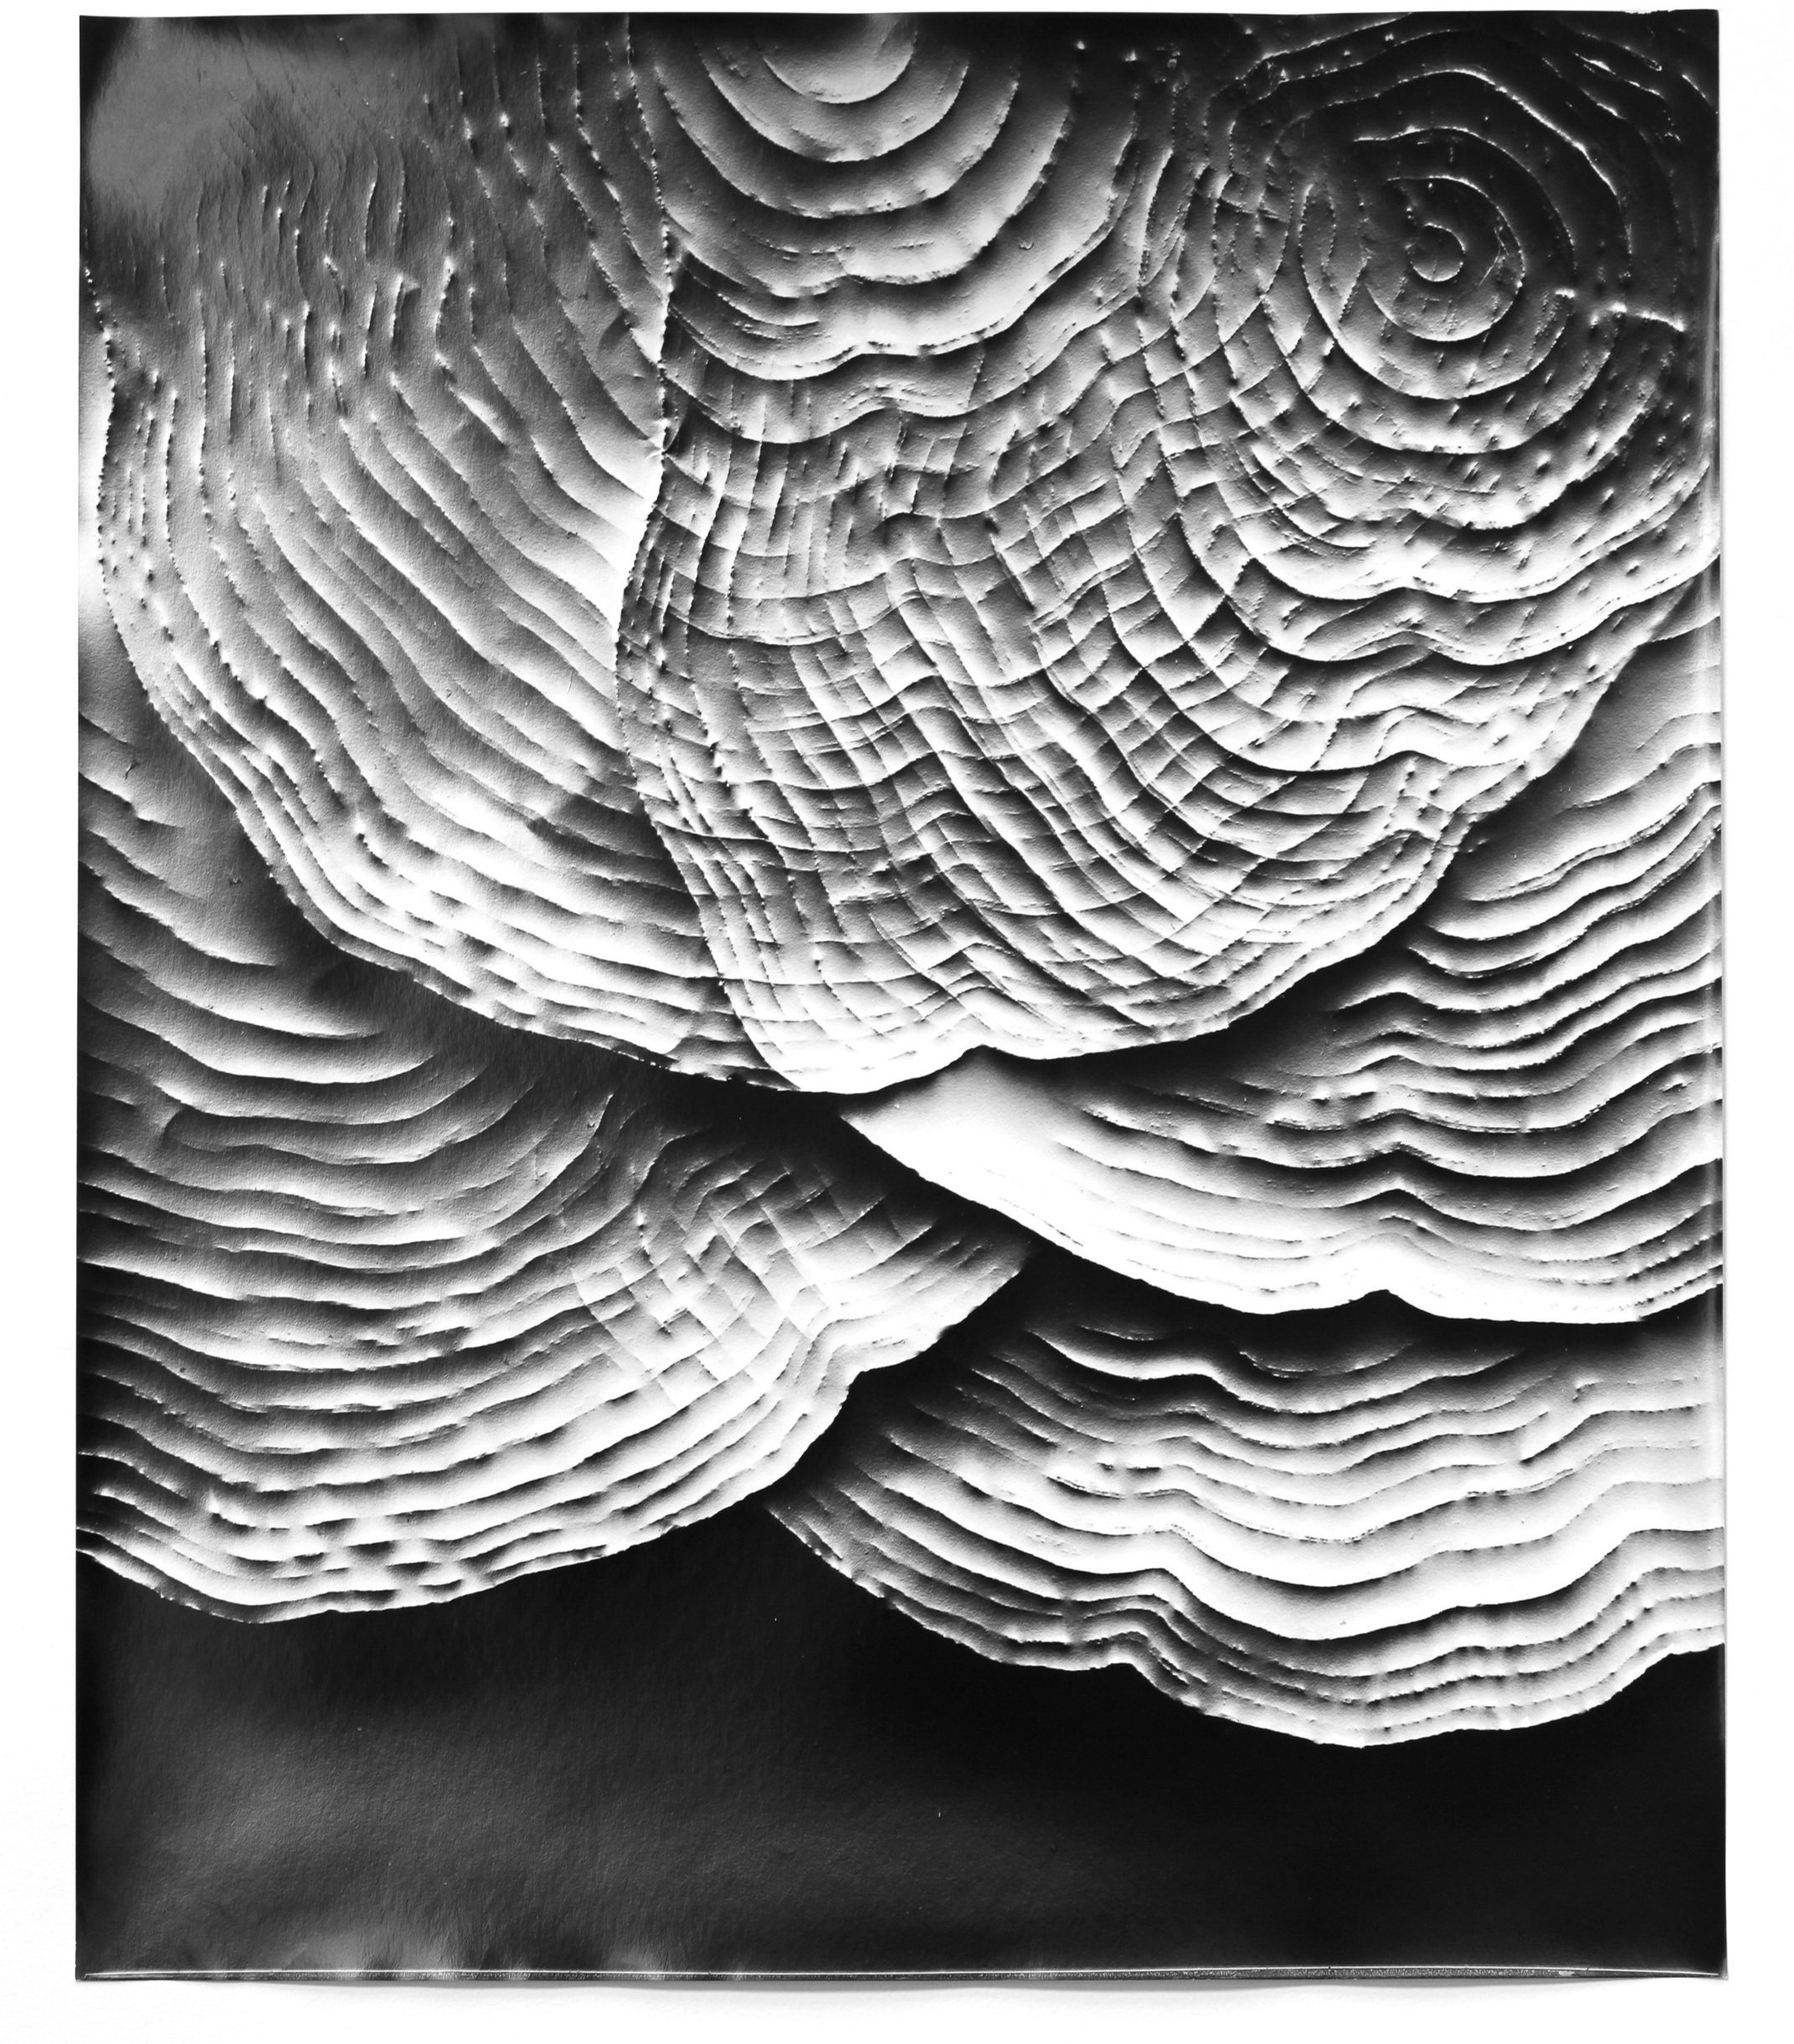   Automatic Earth 92,  2017 Photographic rubbing (embossed silver gelatin photogram) 24 x 20 in 